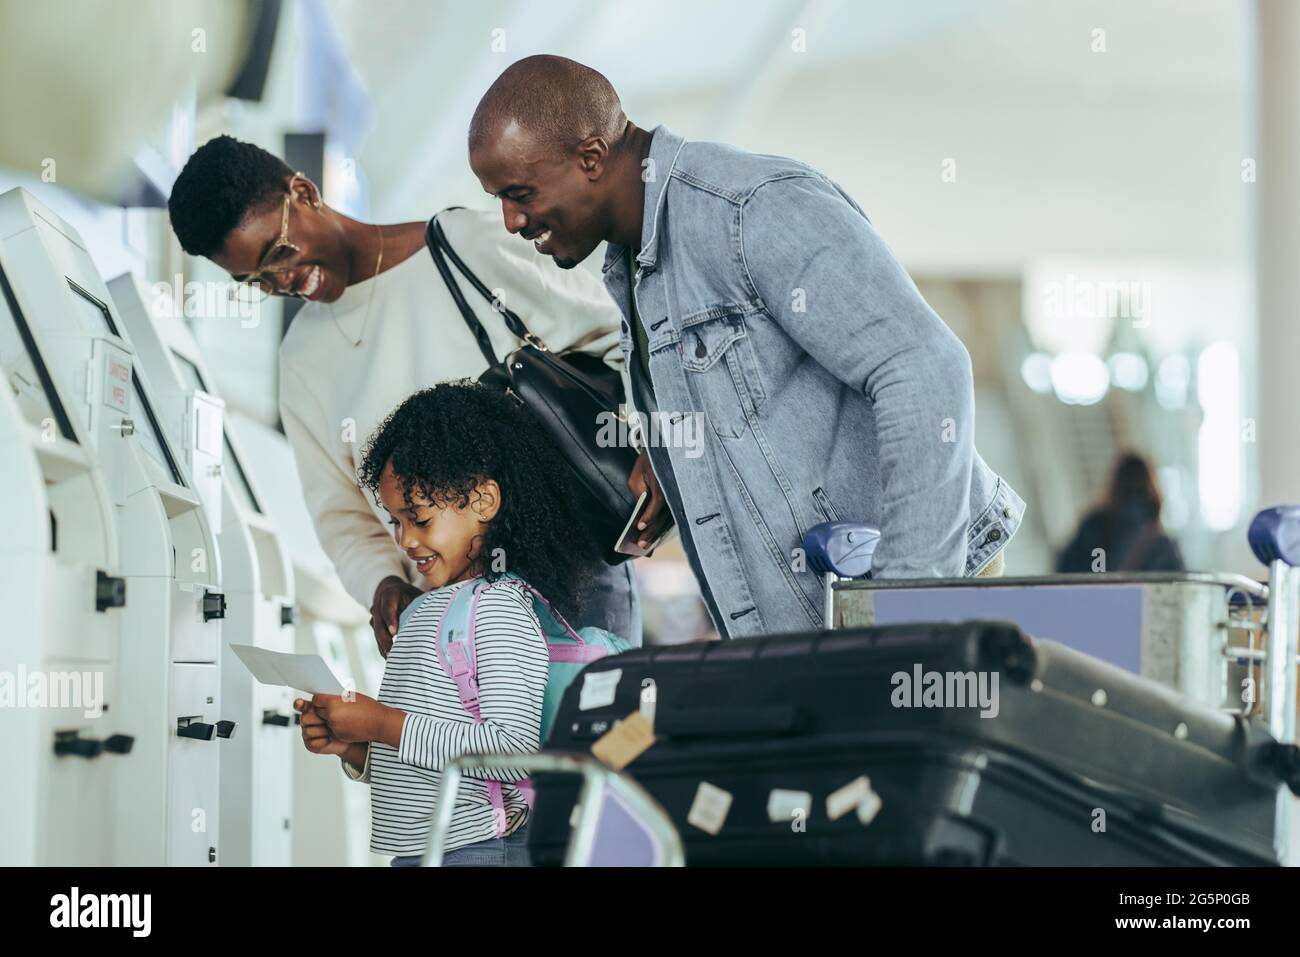 African family looking at the boarding pass in hands of their daughter at airport. Young girl looking happy to hold air ticket print while standing wi Stock Photo